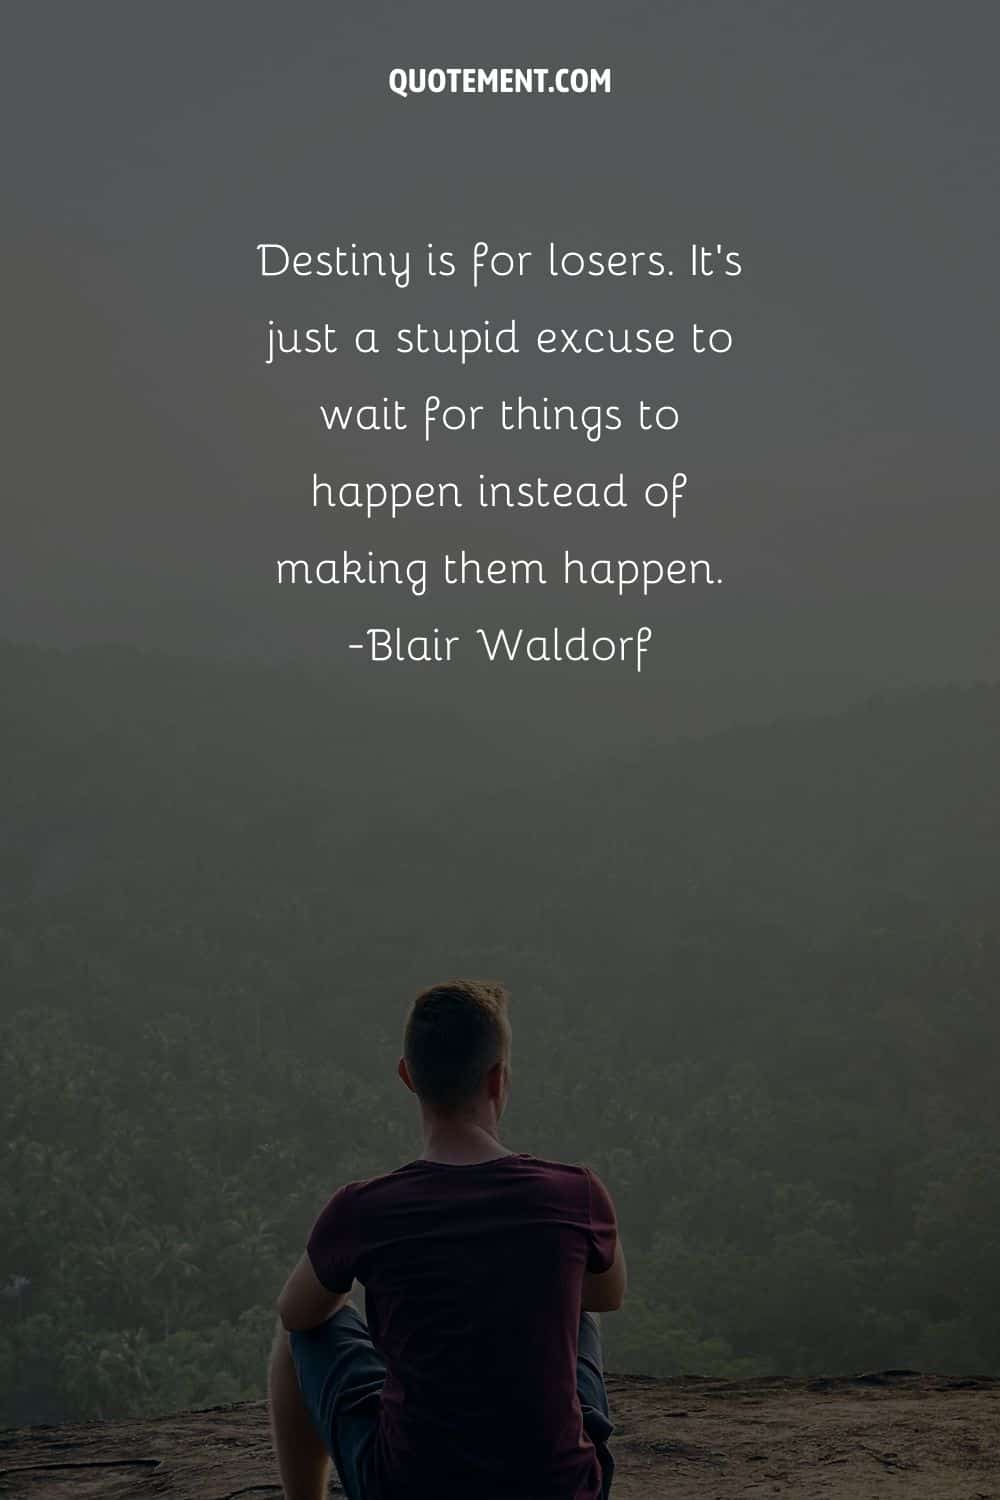 Destiny is for losers. It’s just a stupid excuse to wait for things to happen instead of making them happen